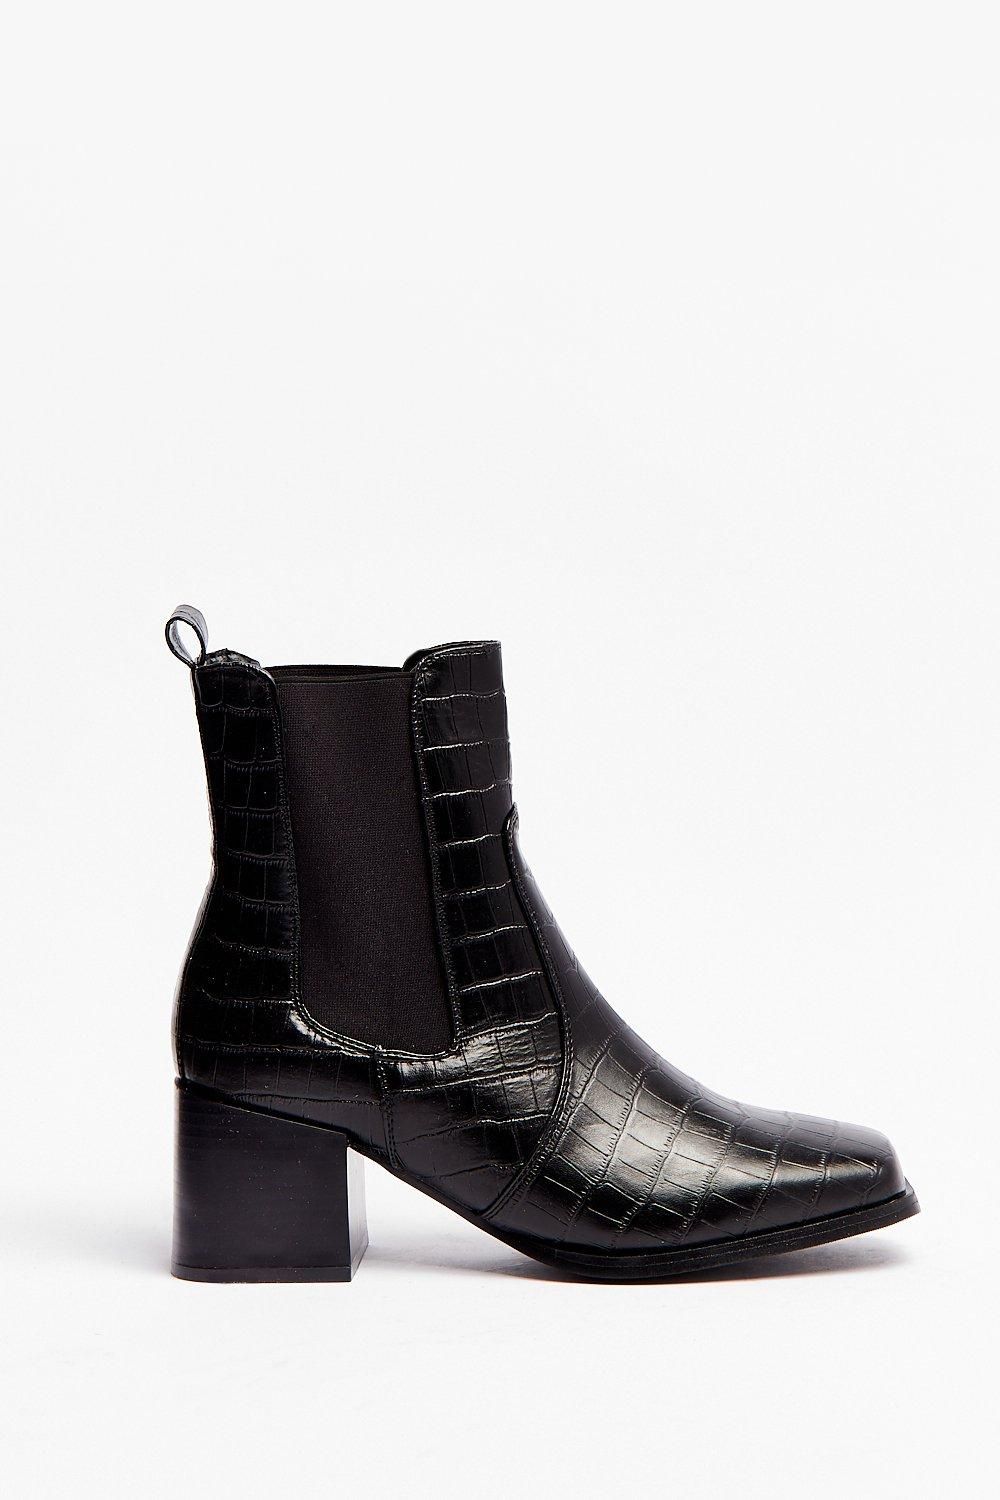 Croc Square Toe Heeled Ankle Boots | Nasty Gal (US)